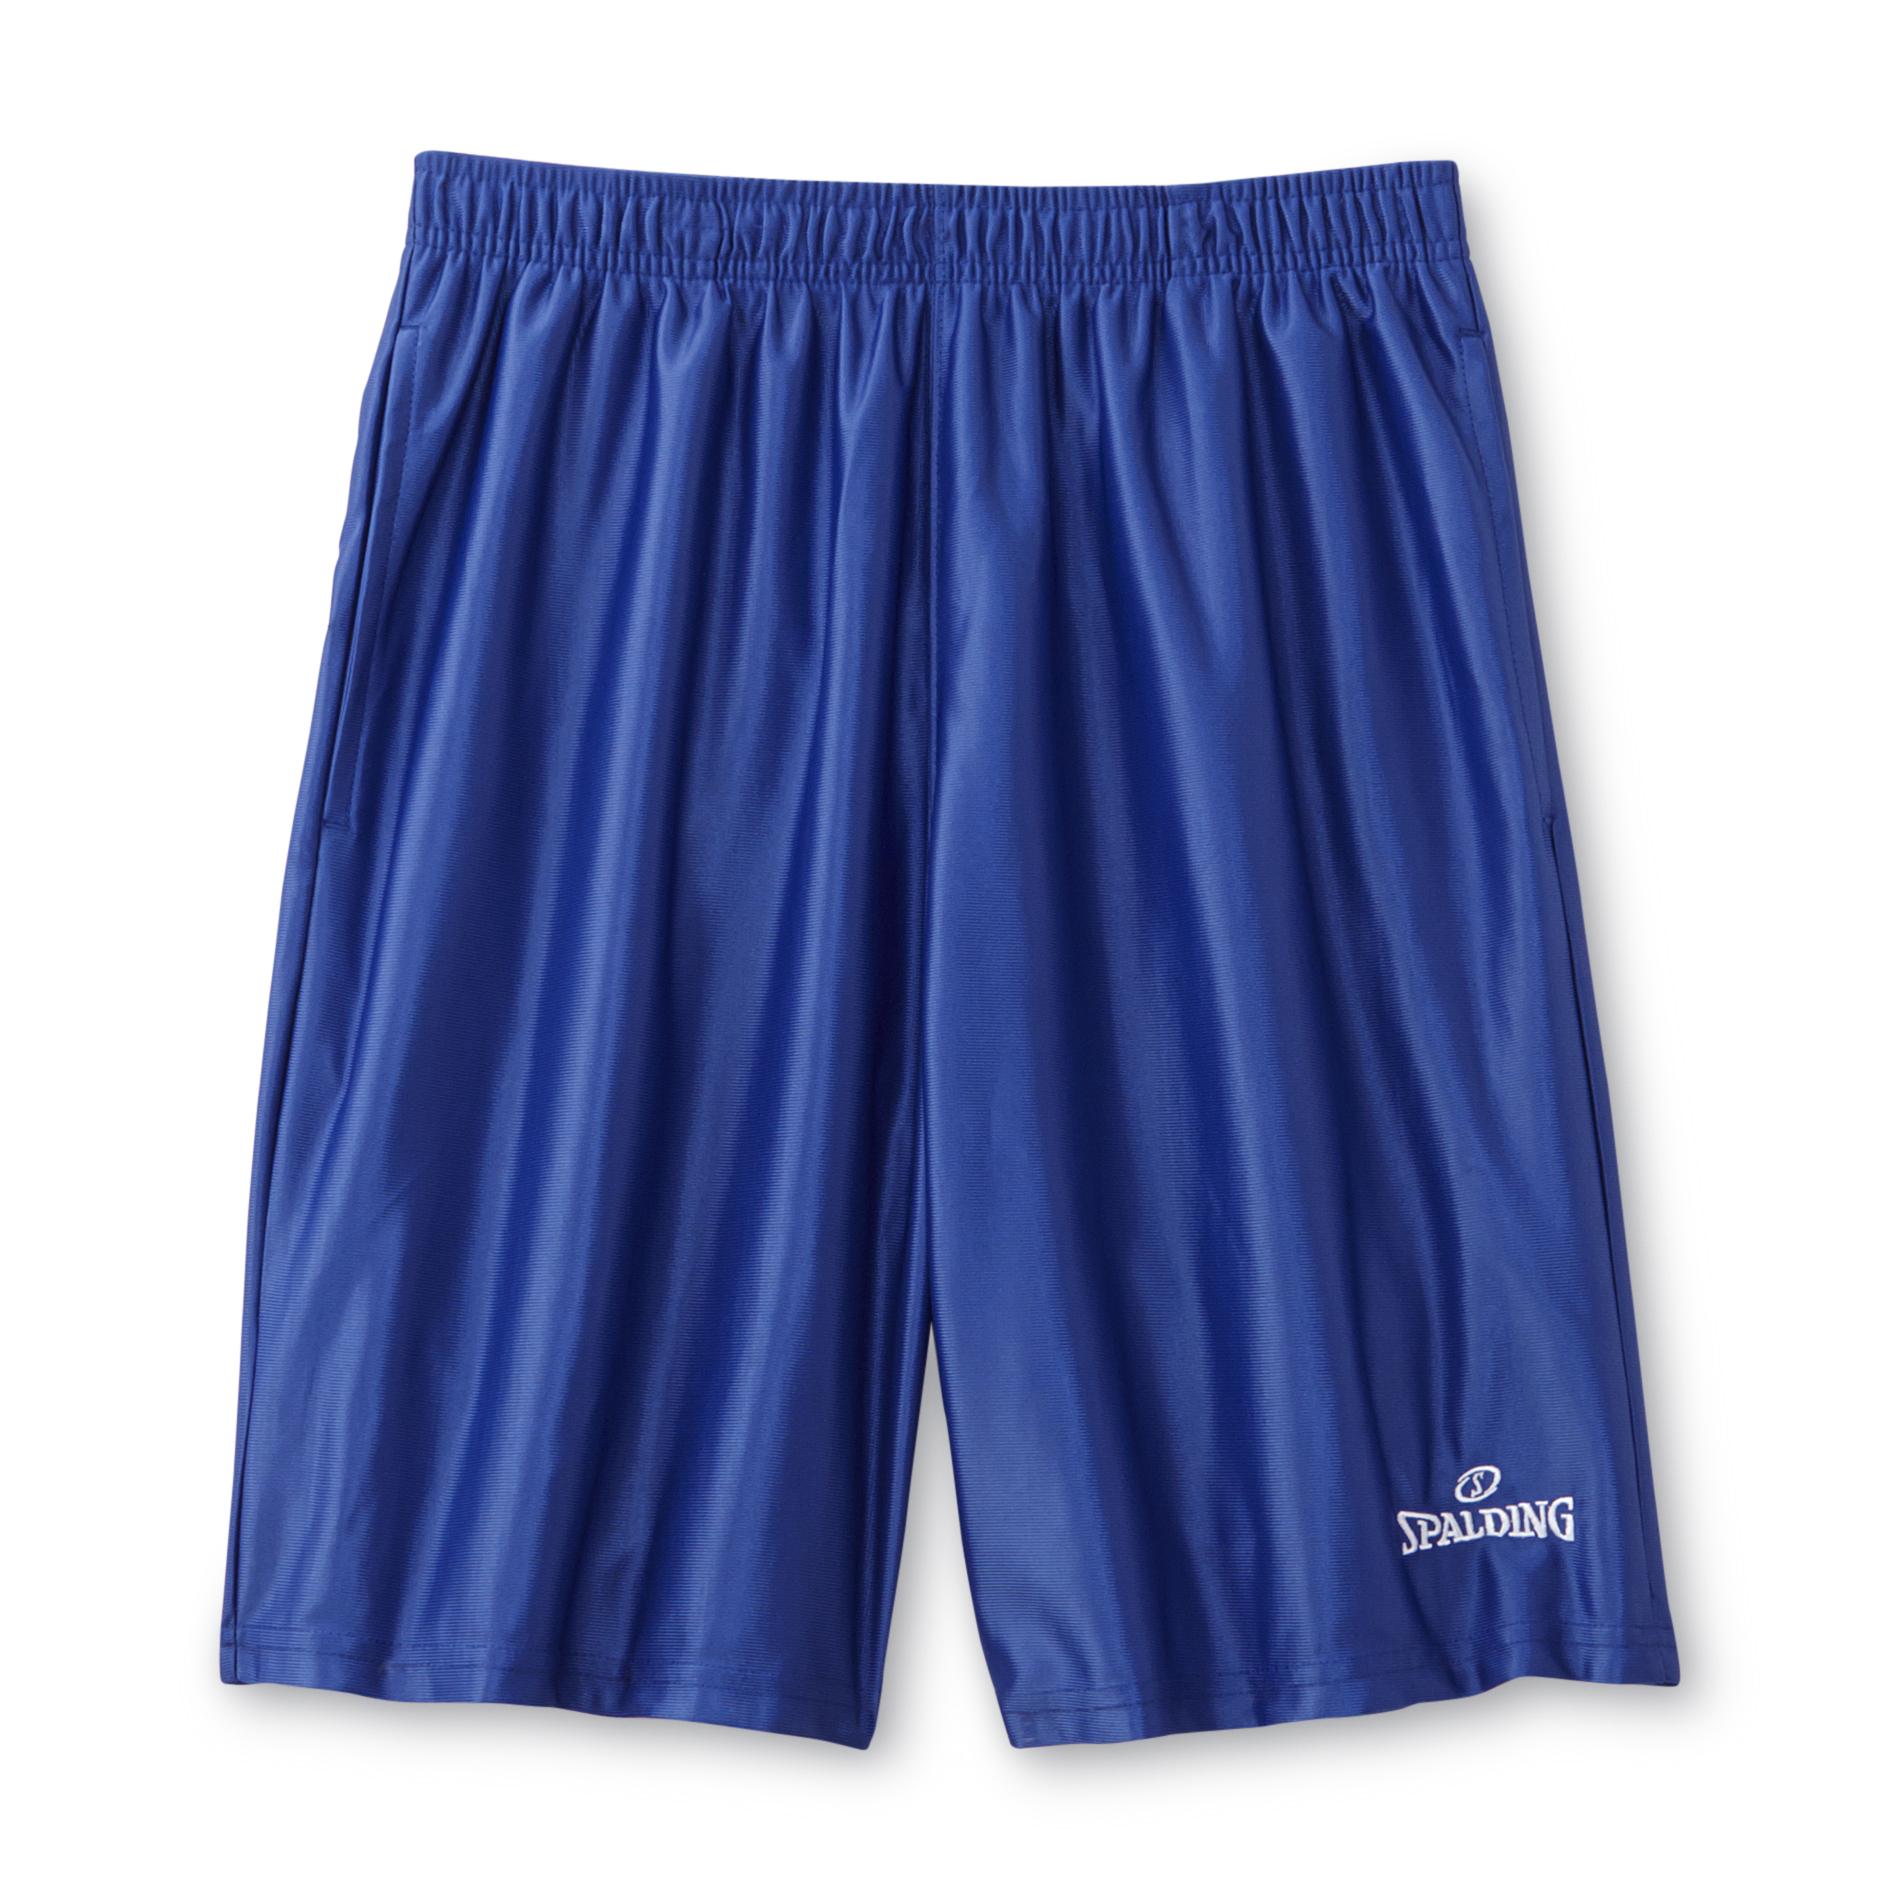 UPC 888282045328 product image for Young Men's Basketball Shorts | upcitemdb.com